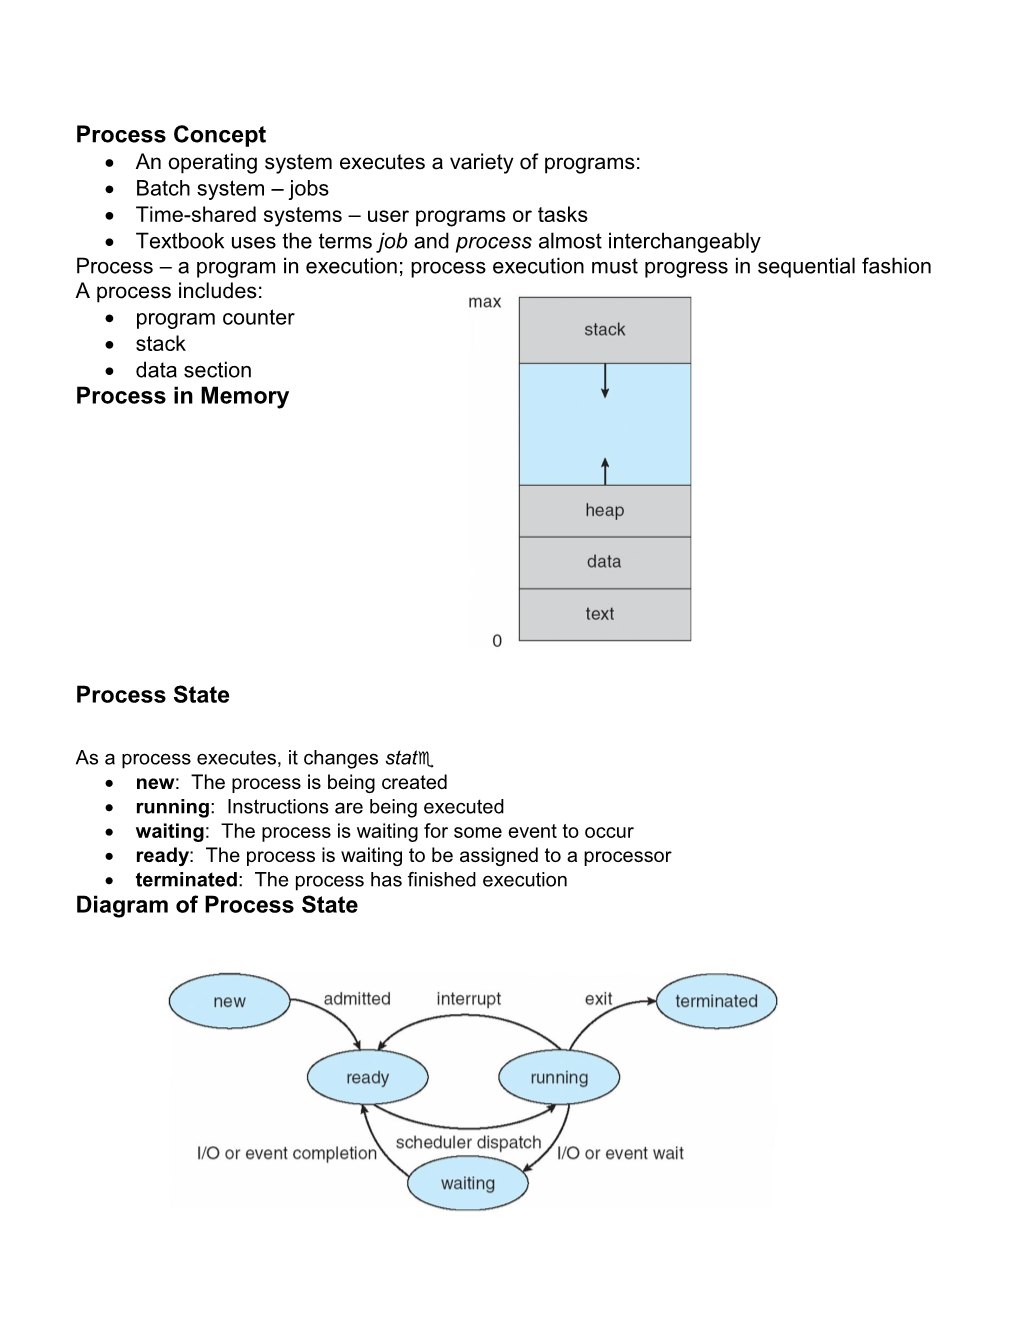 Process Concept Process in Memory Process State Diagram of Process